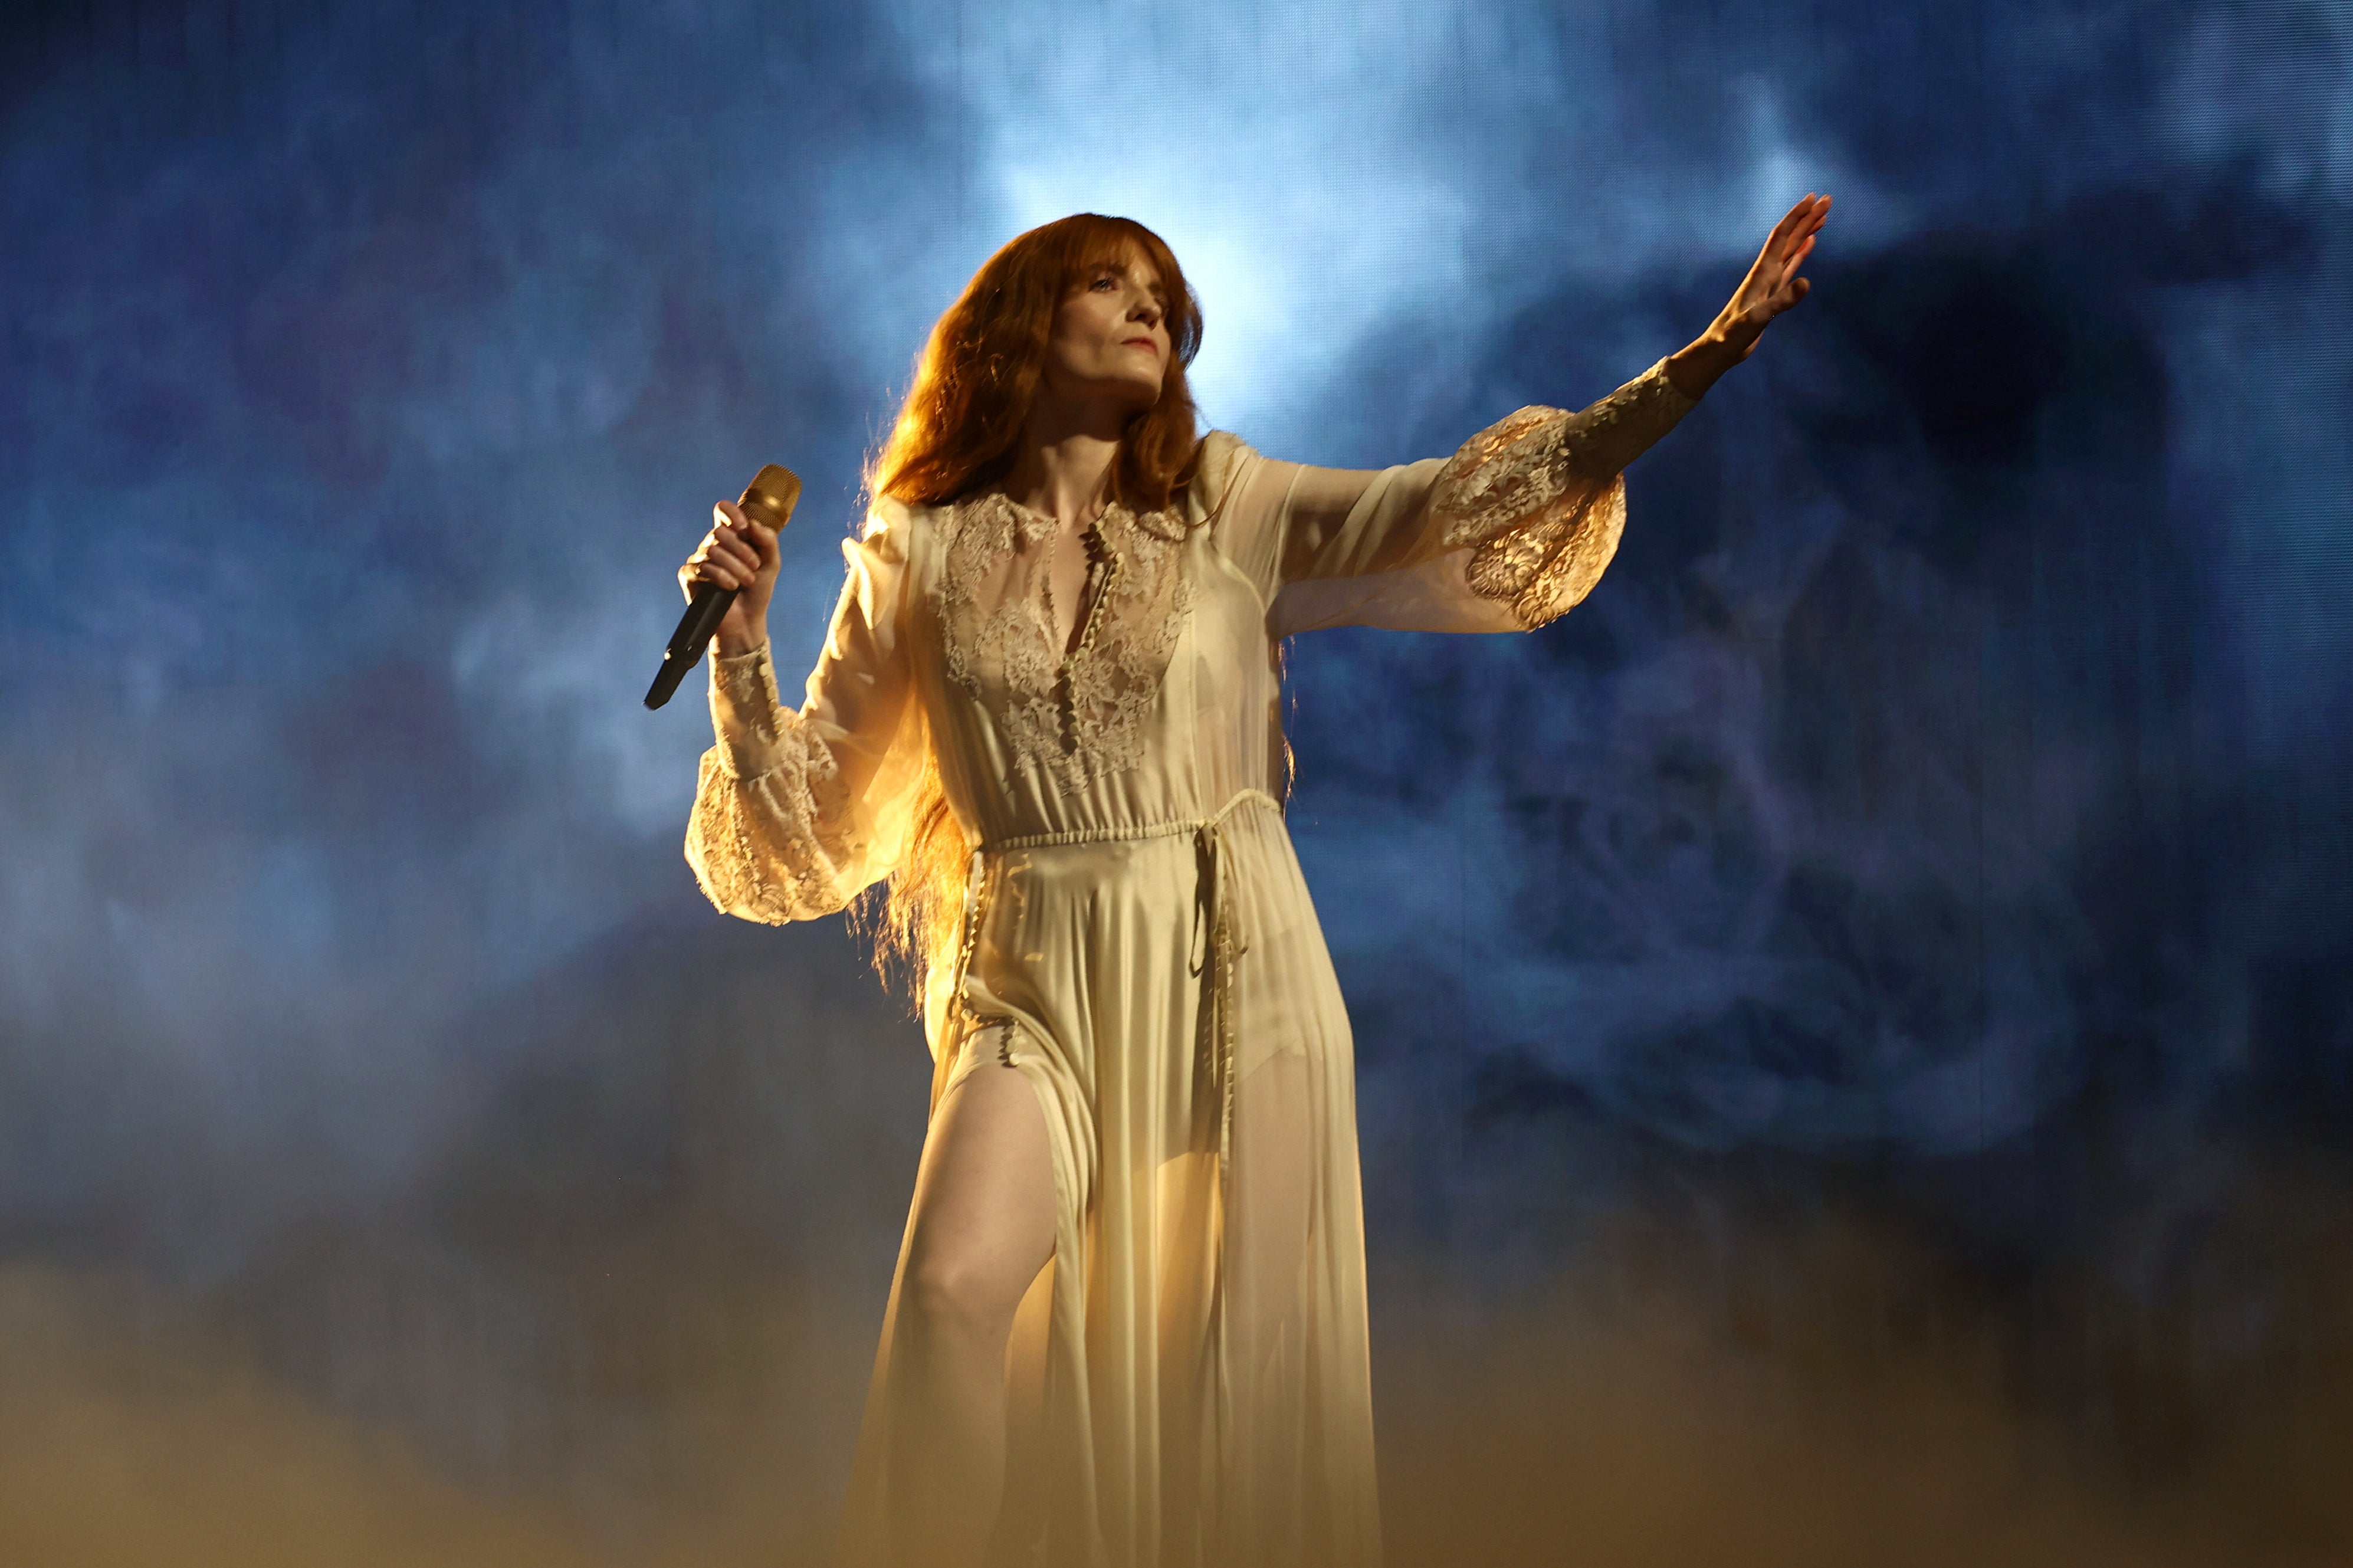 Florence Welch of Florence + The Machine will be headlining the Proms